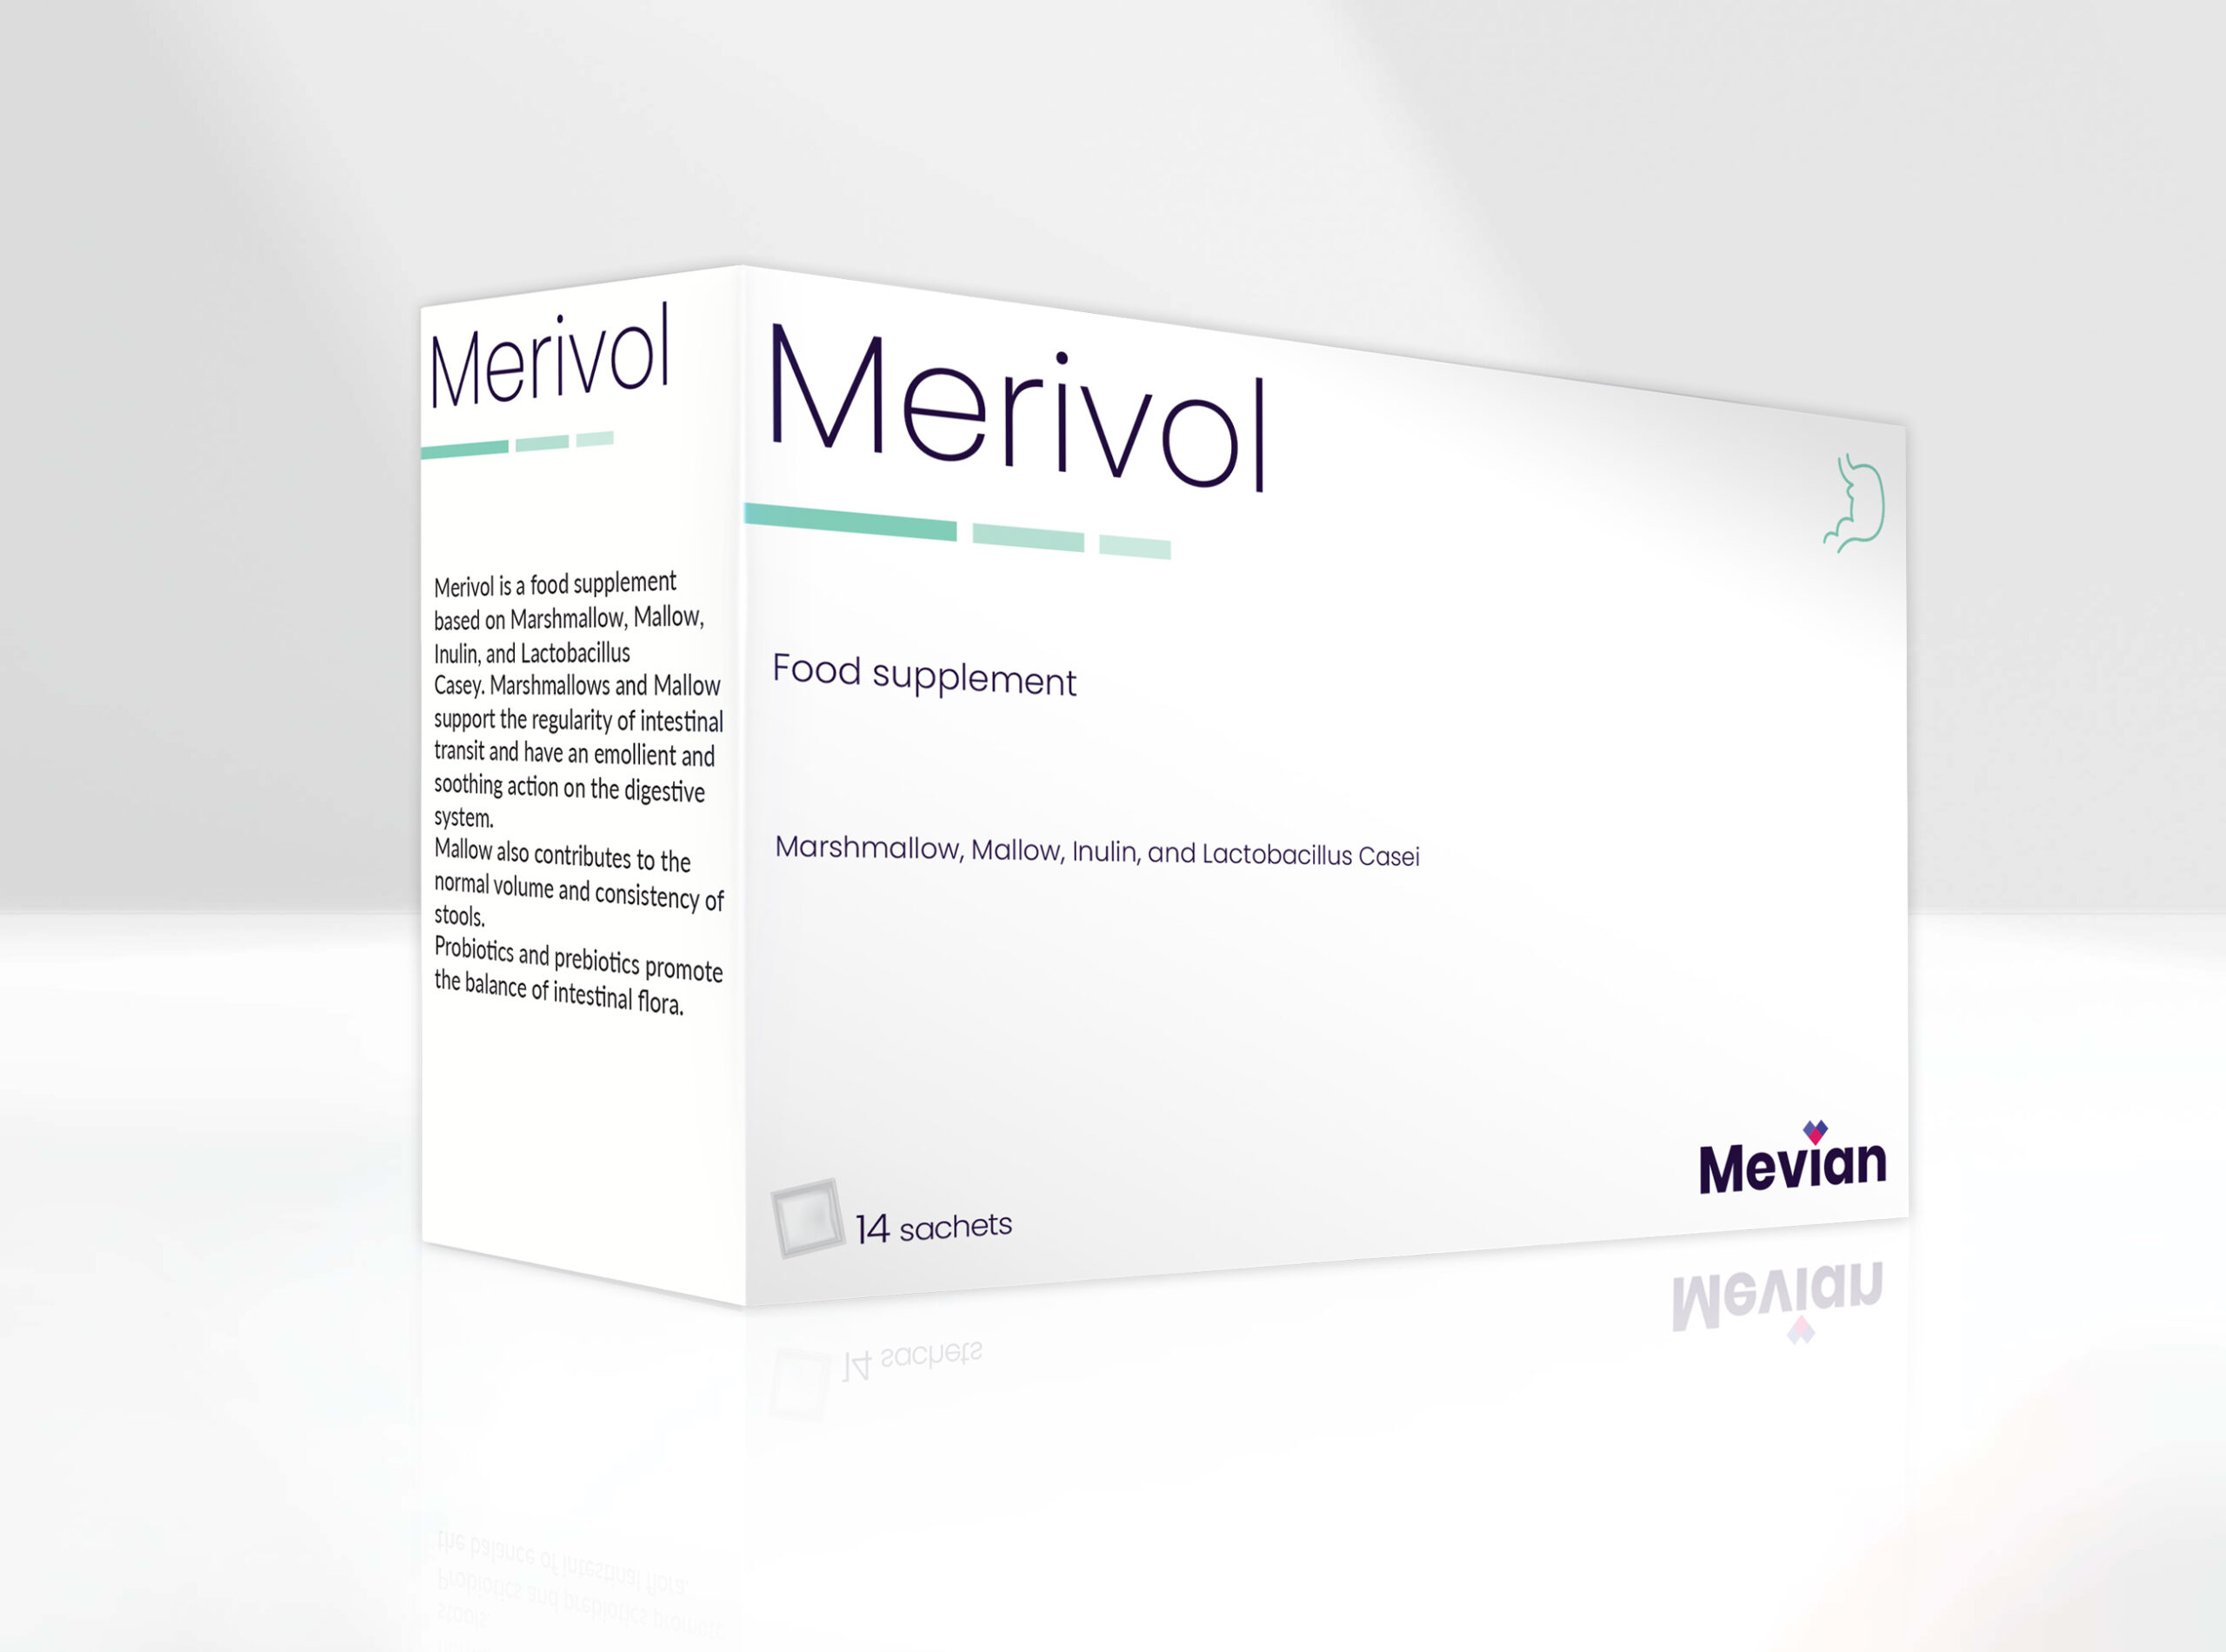 Merivol is a  safe and effective remedy to increase the fecal mass and restore normal bacterial flora accompanied by the absence of gas or abdominal pain with high tolerability for adults, children, pregnant women, elderly people, and diabetics.